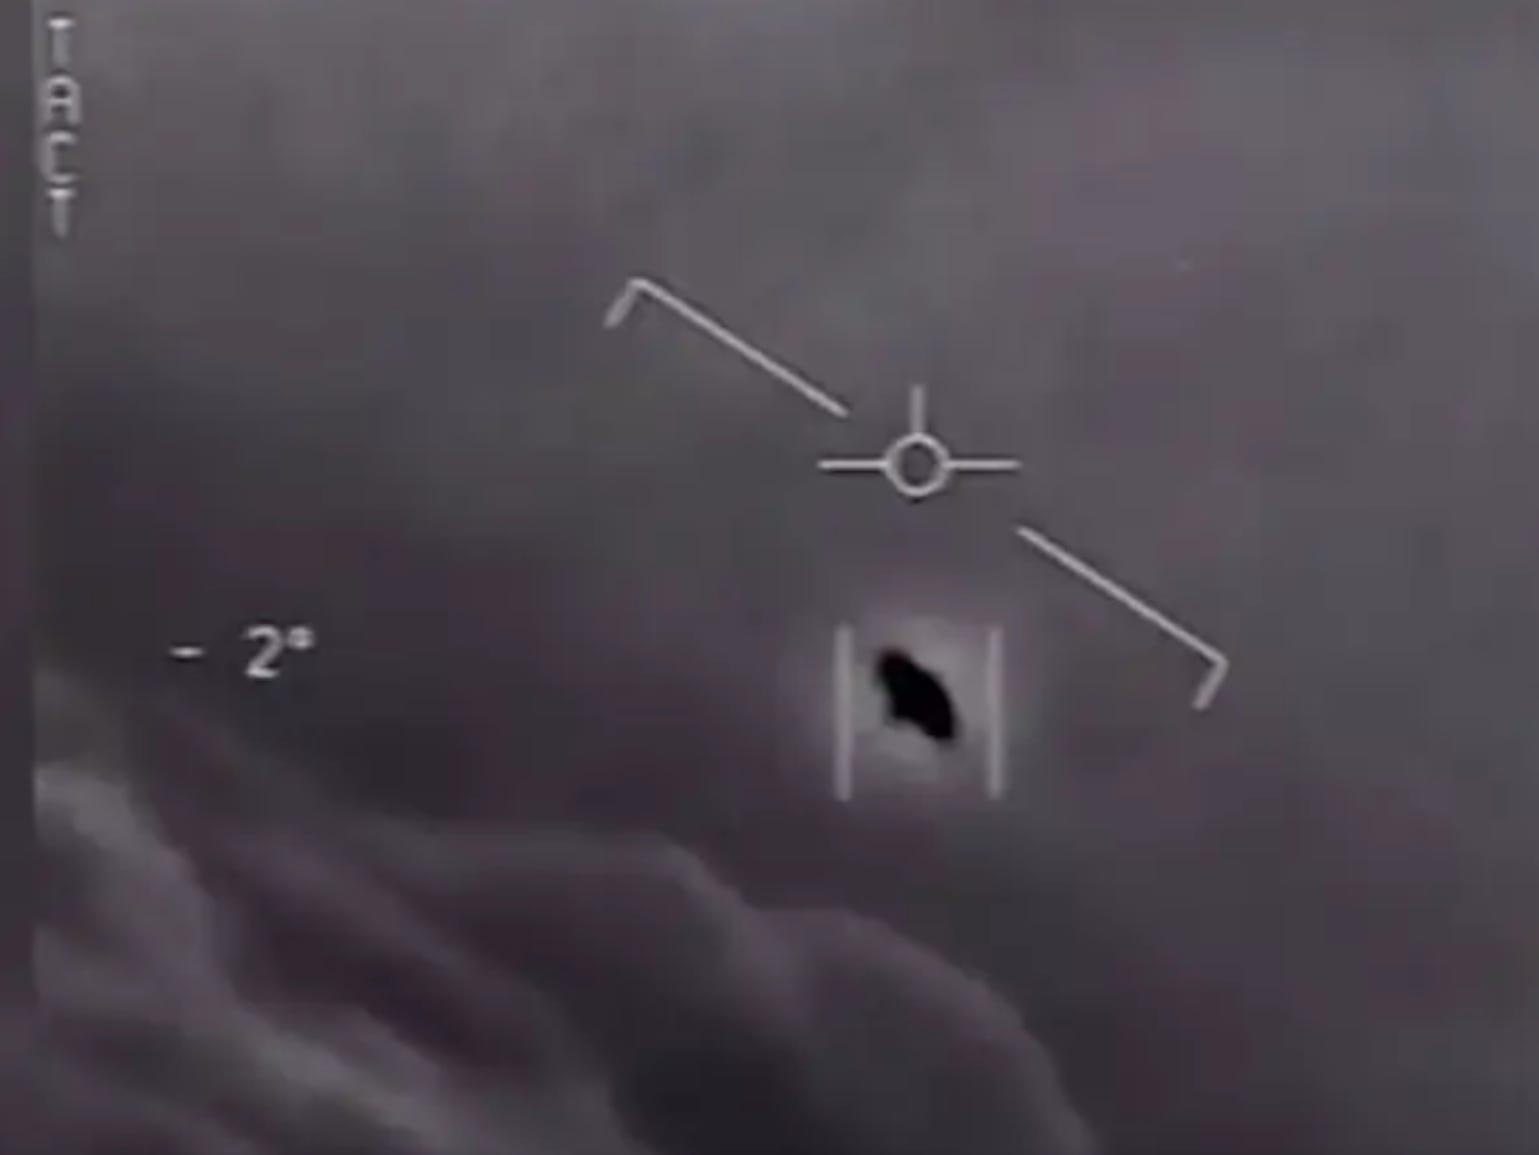 UFO expert says aliens may or may not be out there but 'technological artifacts exist way beyond our comprehension'